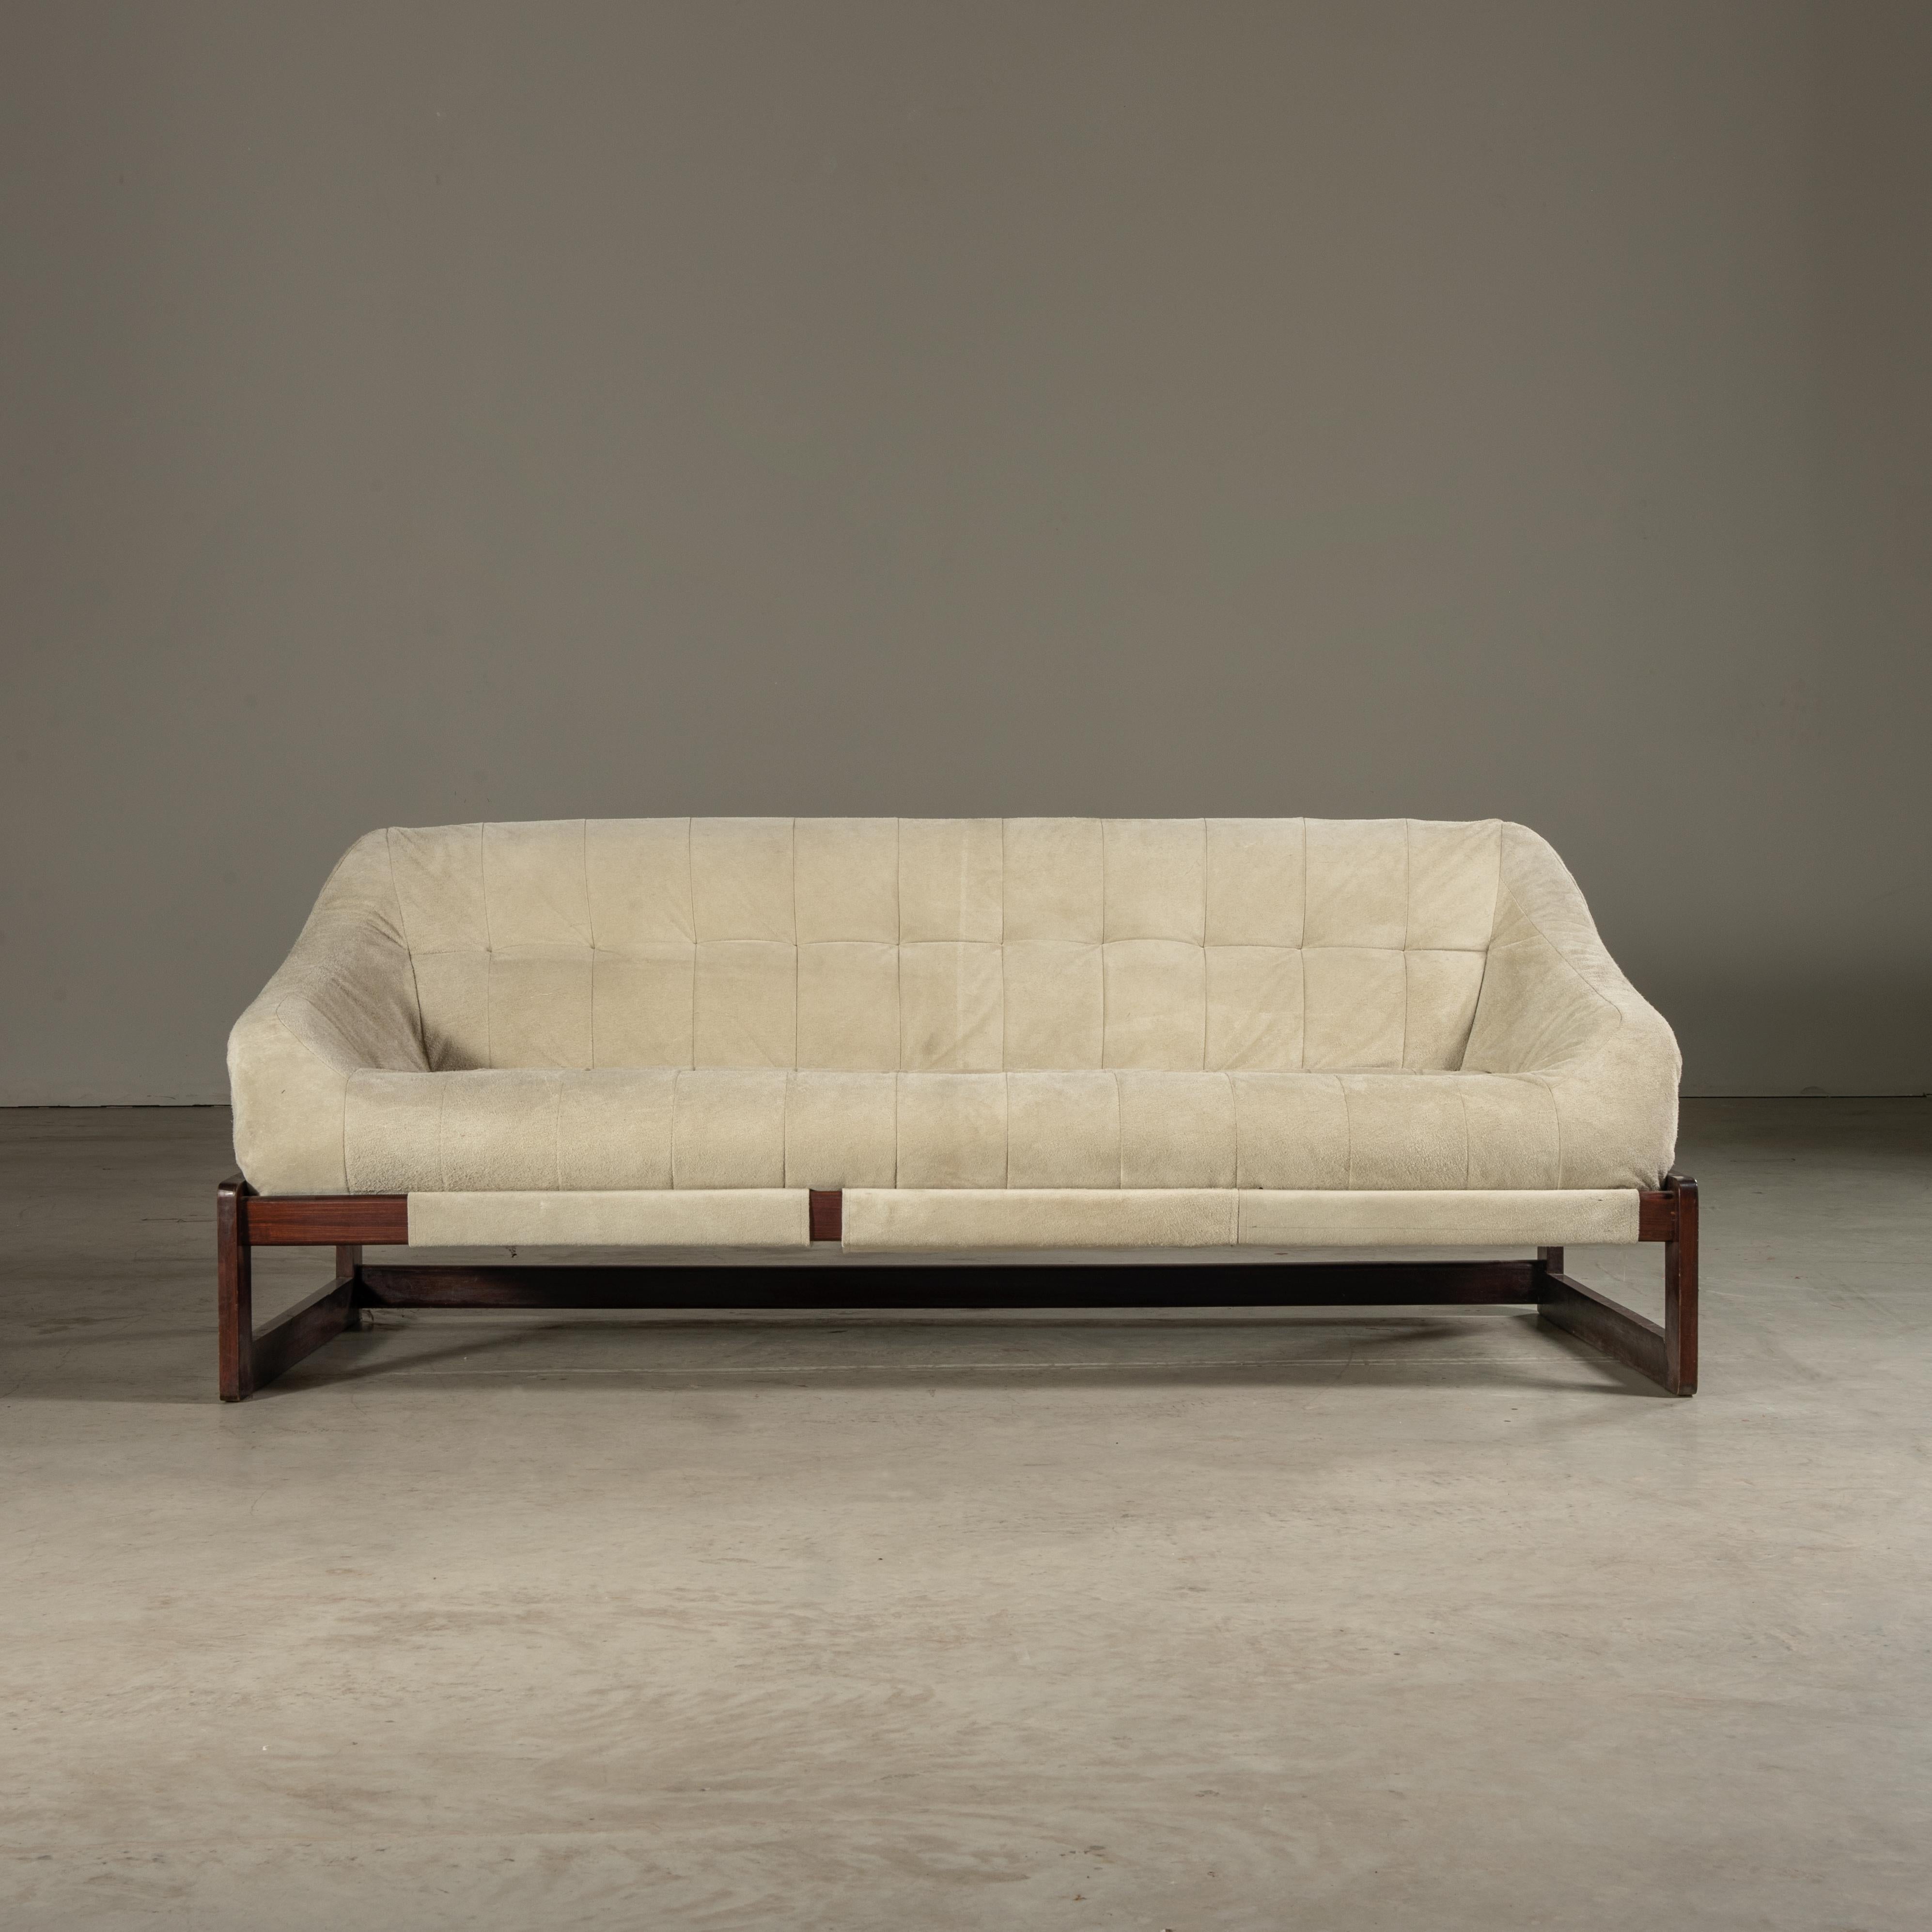 Architectural Sofa in Hardwood, by Percival Lafer, Brazilian Mid-Century Modern For Sale 2